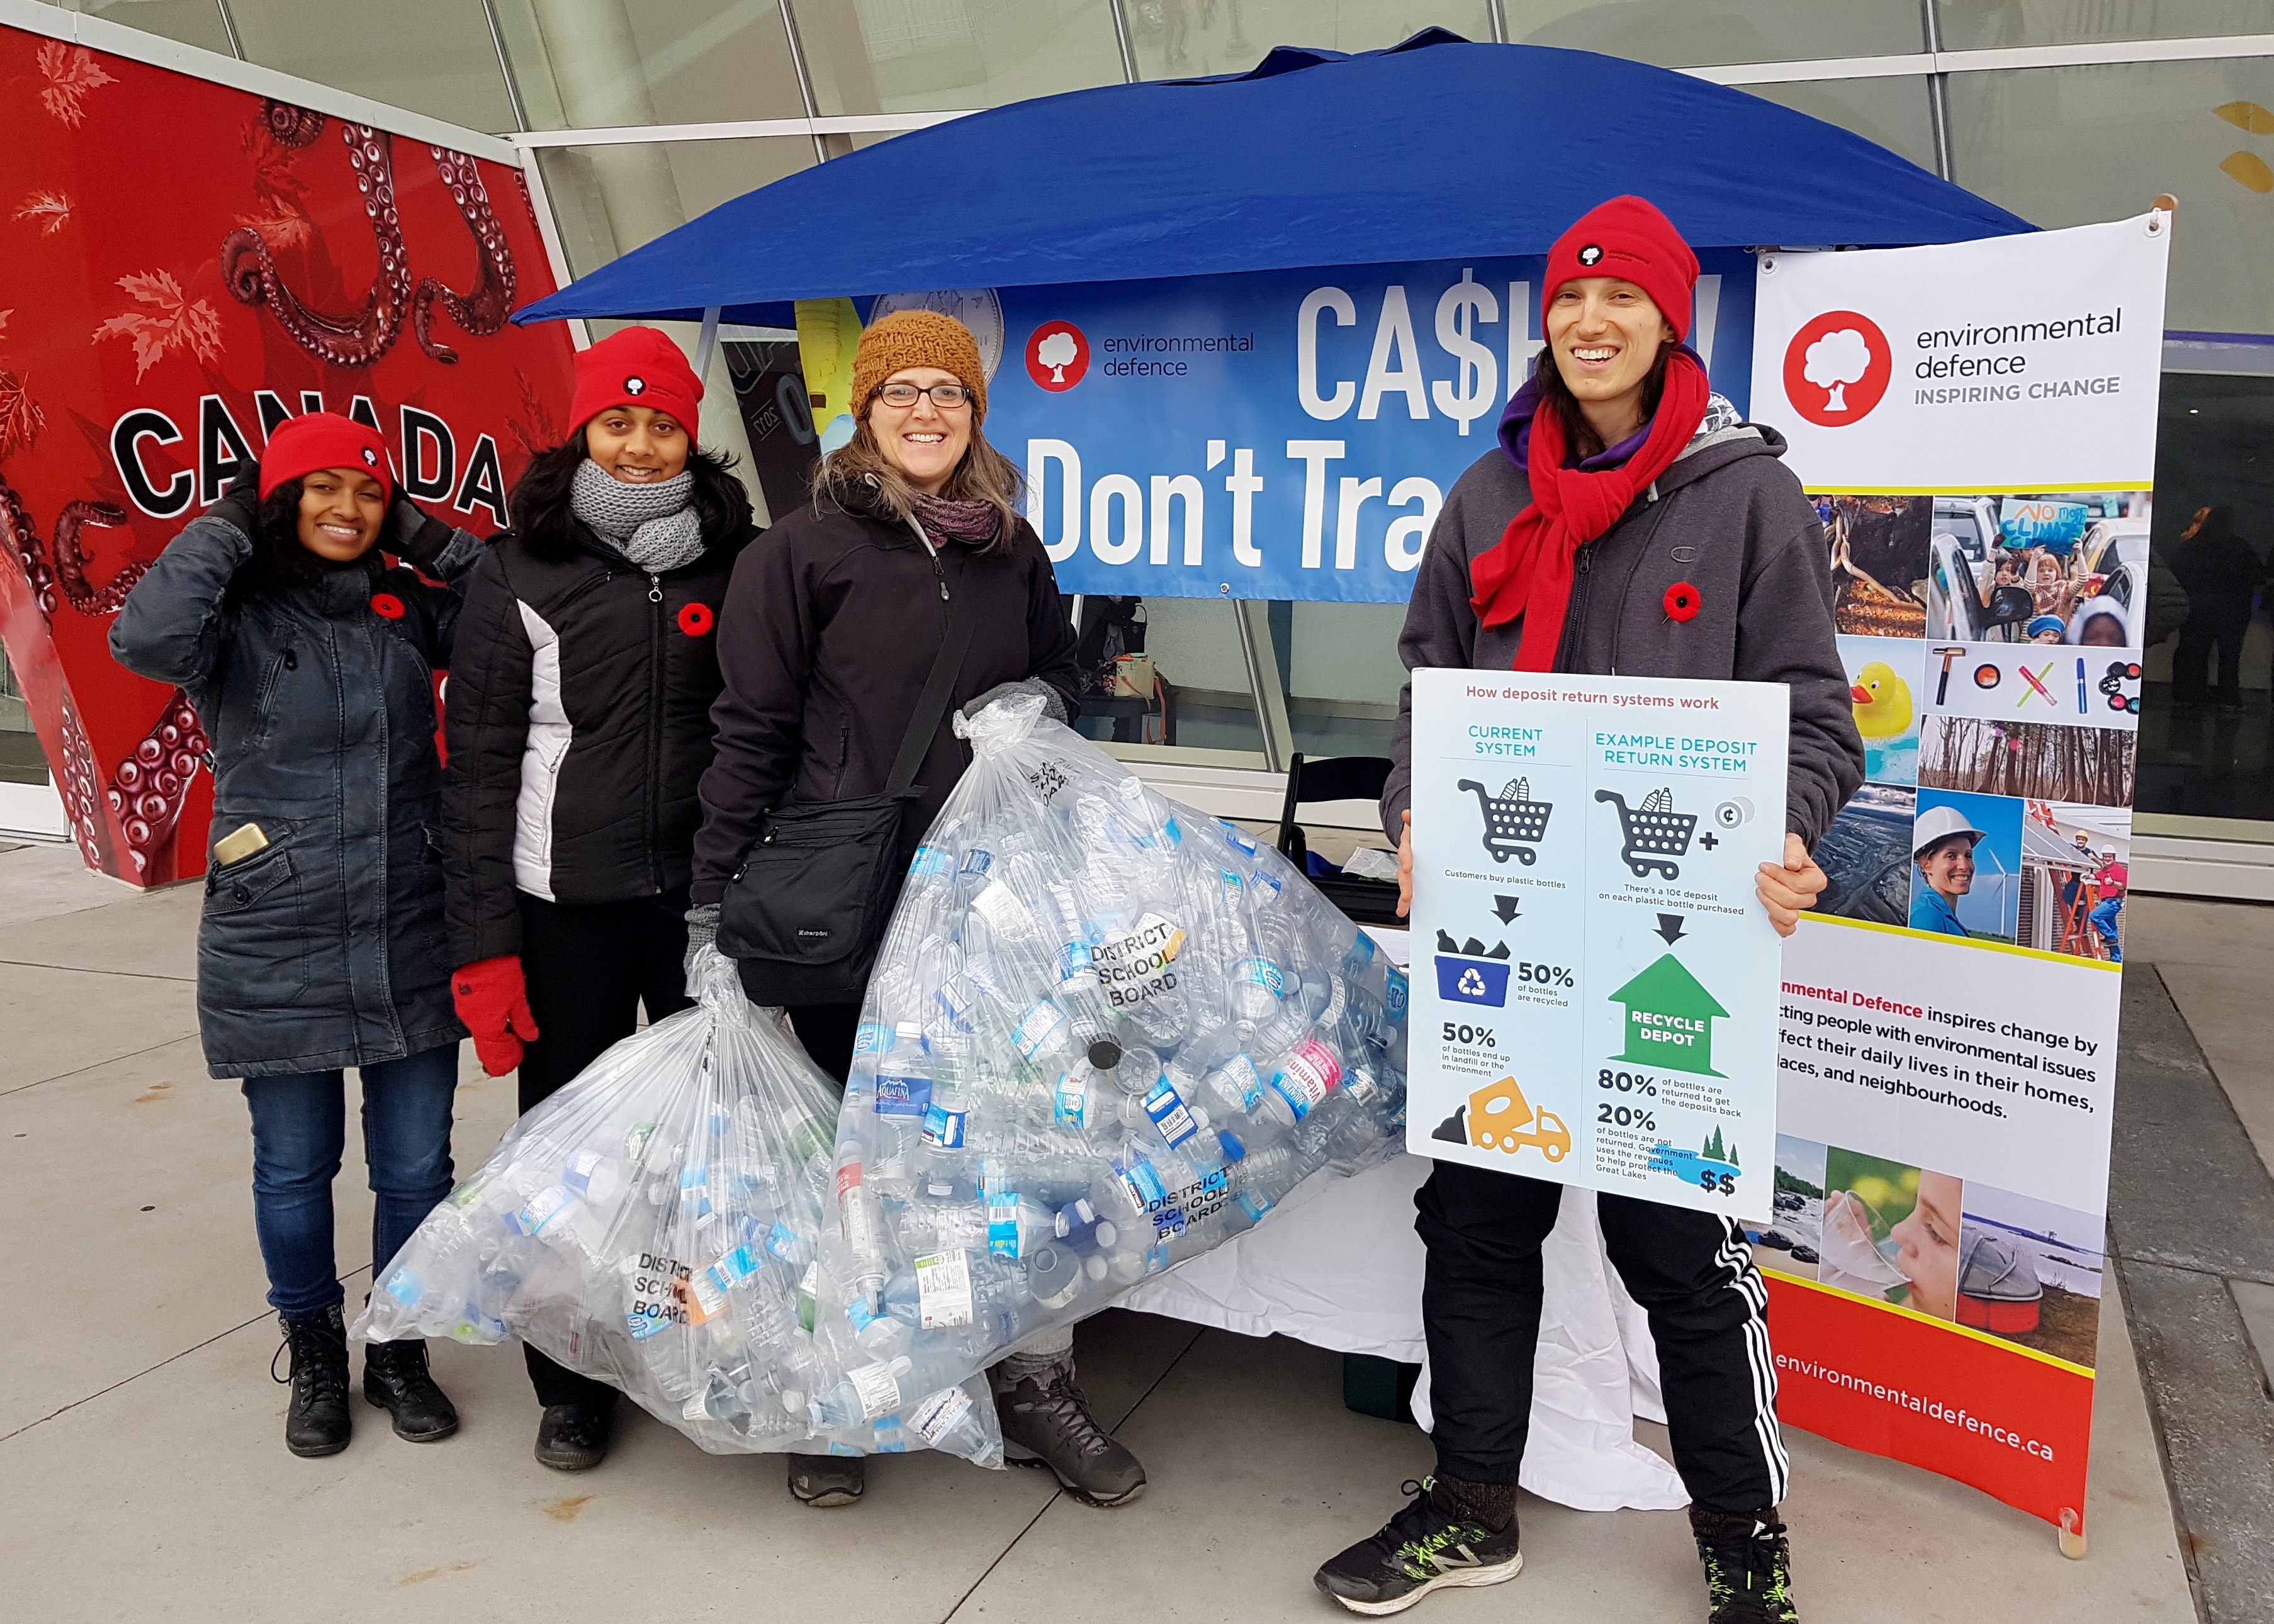 Plastic bottle collection events give Toronto residents a chance